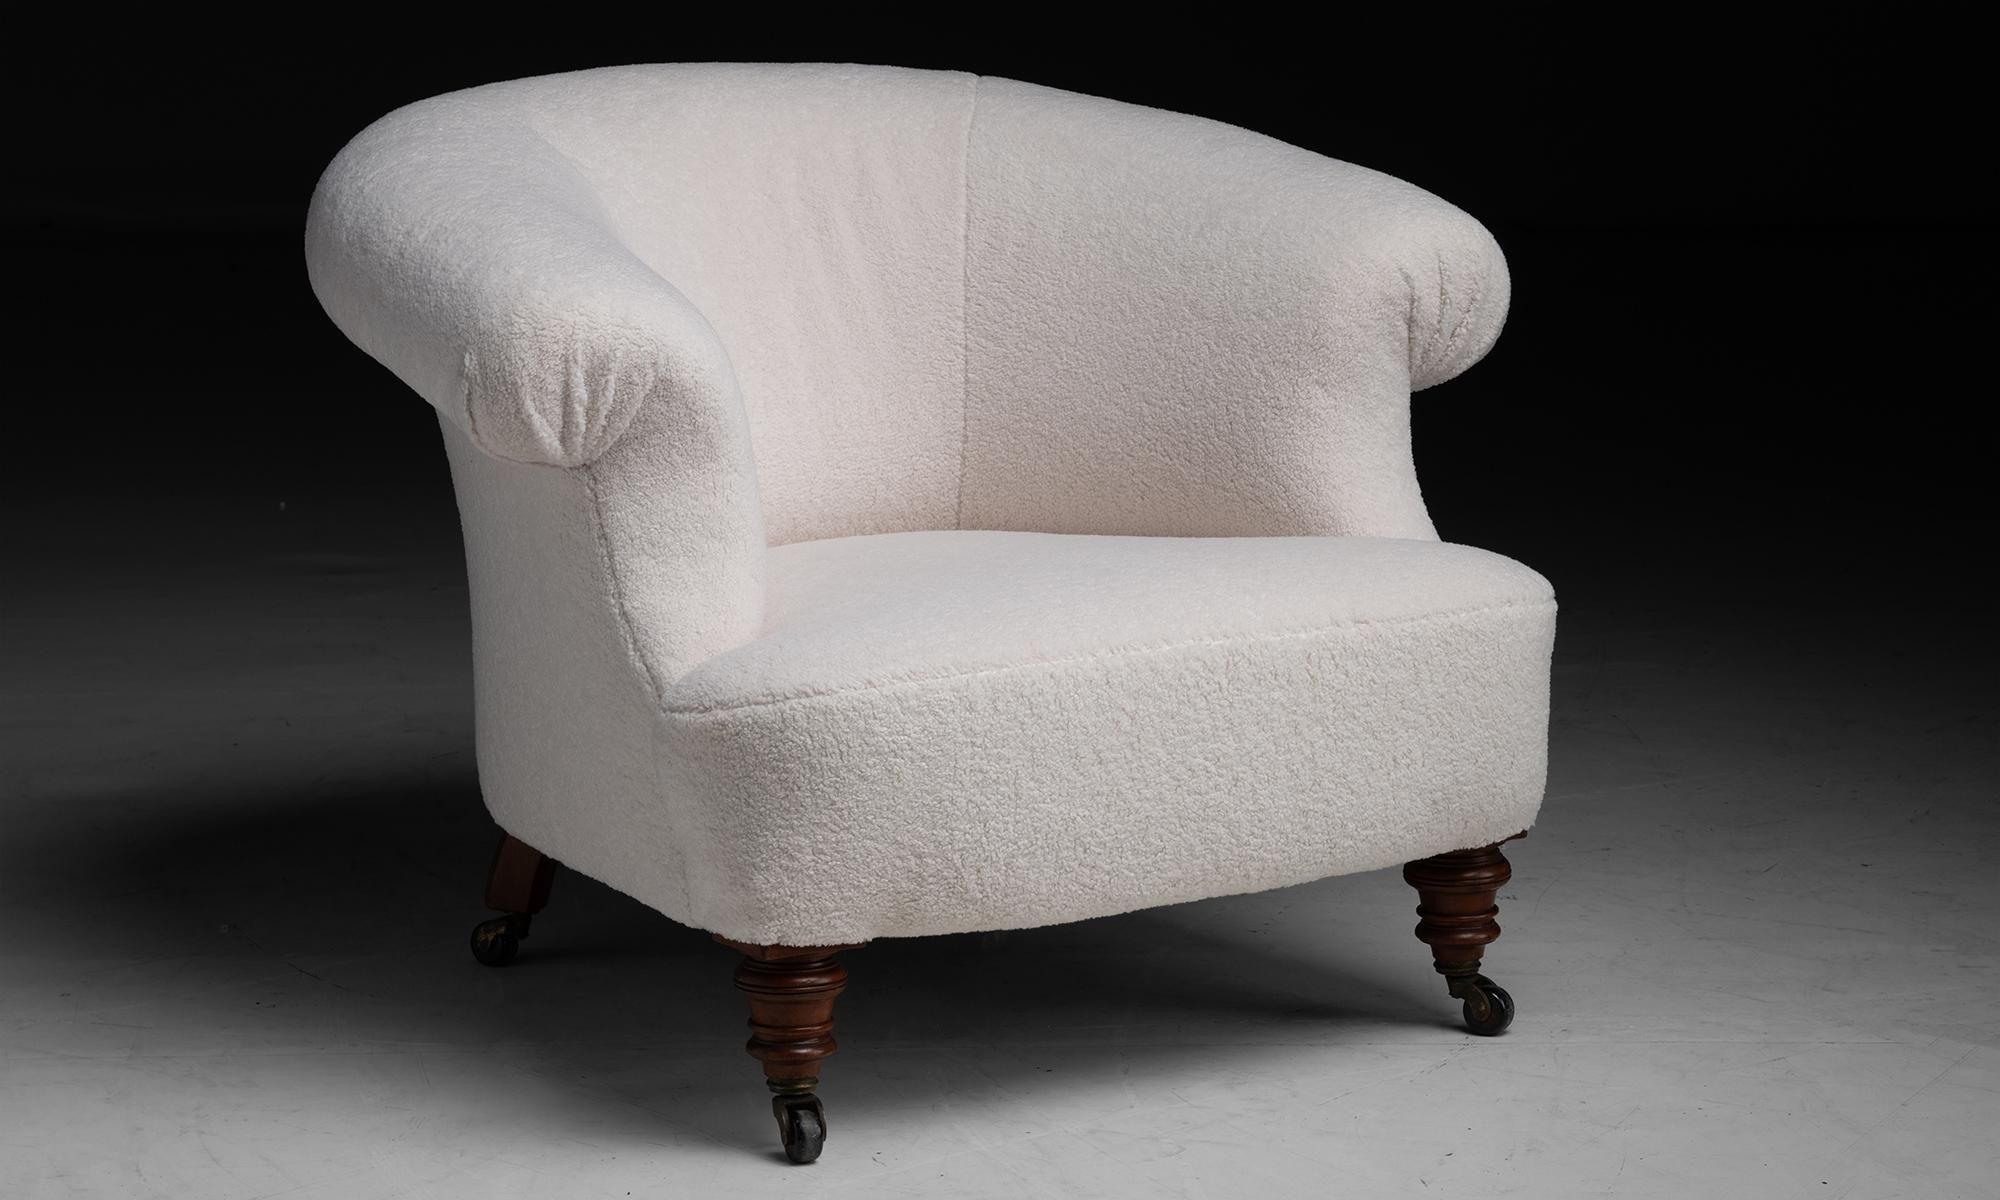 Tub Chair in Boucle
England circa 1890
Antique frame recently upholstered in Robert Kime fabric
37”w x 33”d x 28”h x 14”seat